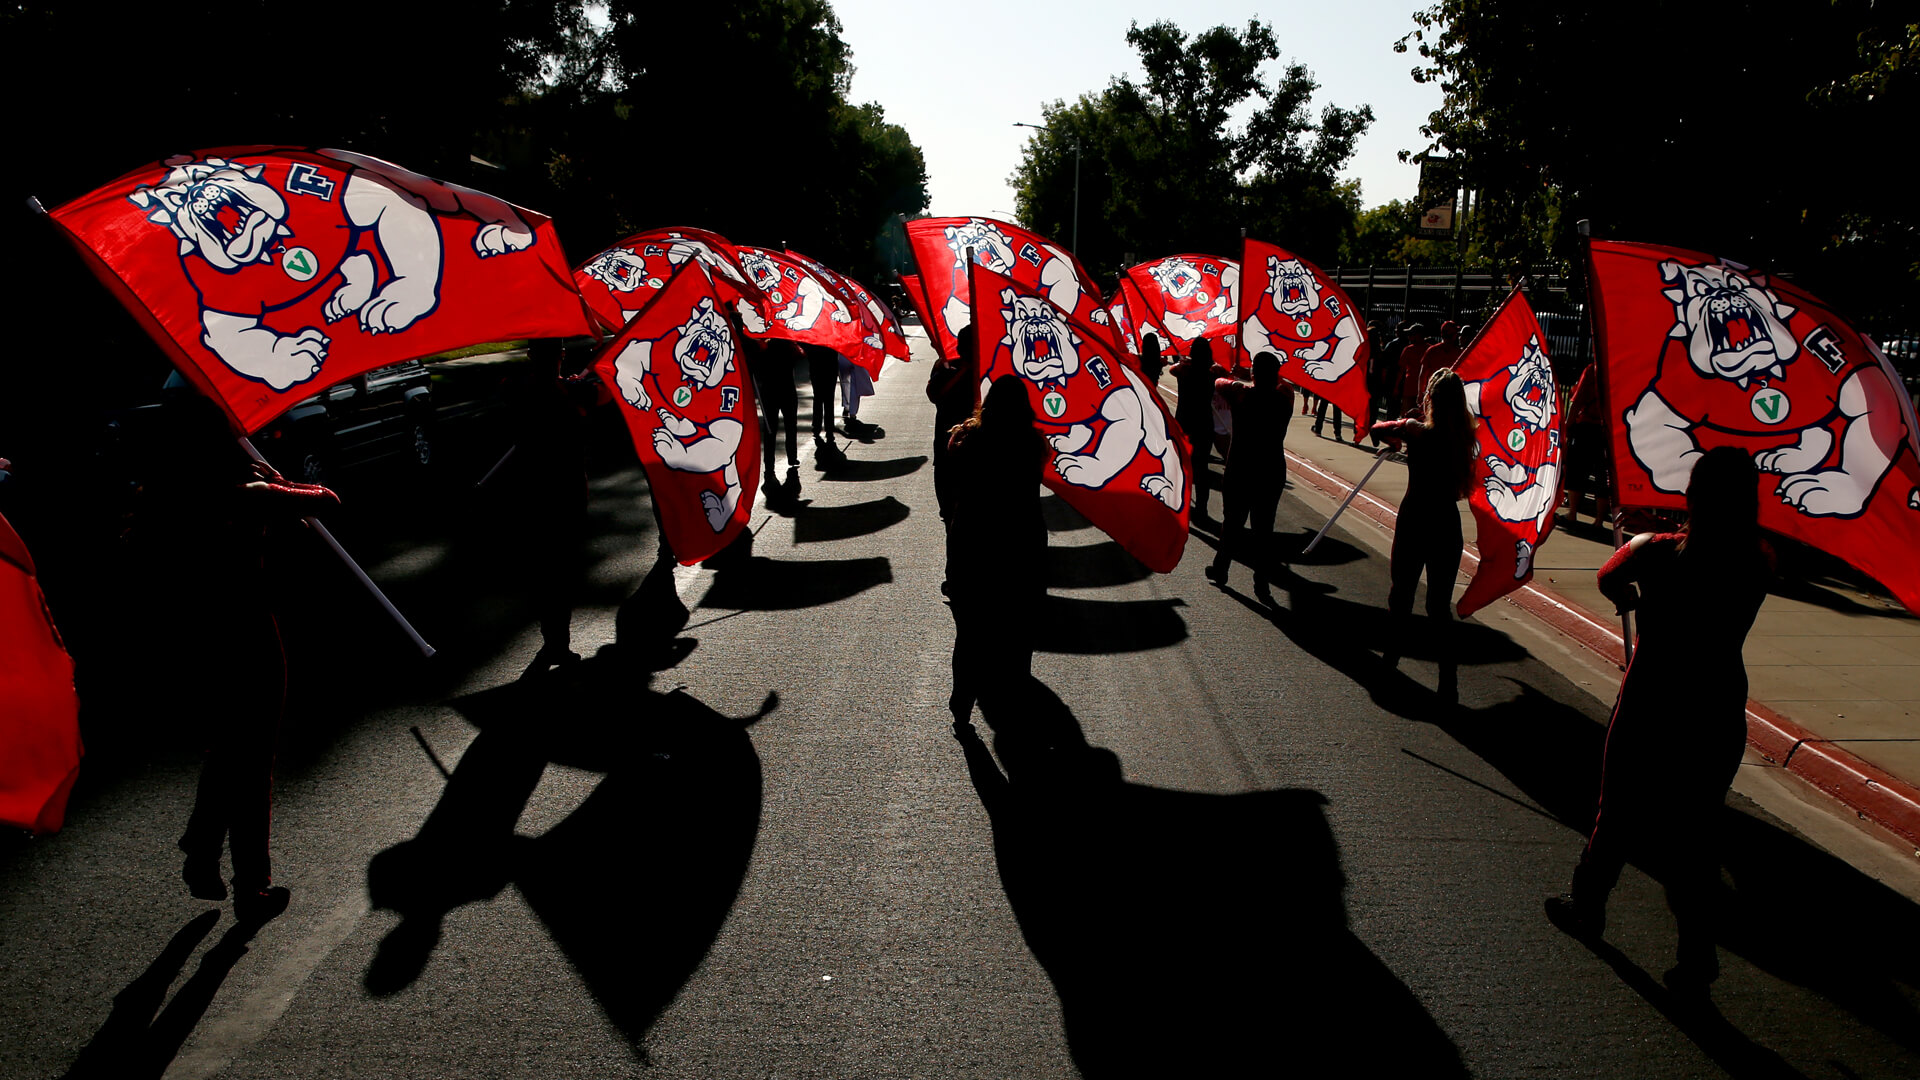 Fresno State students marching with Fresno State flags